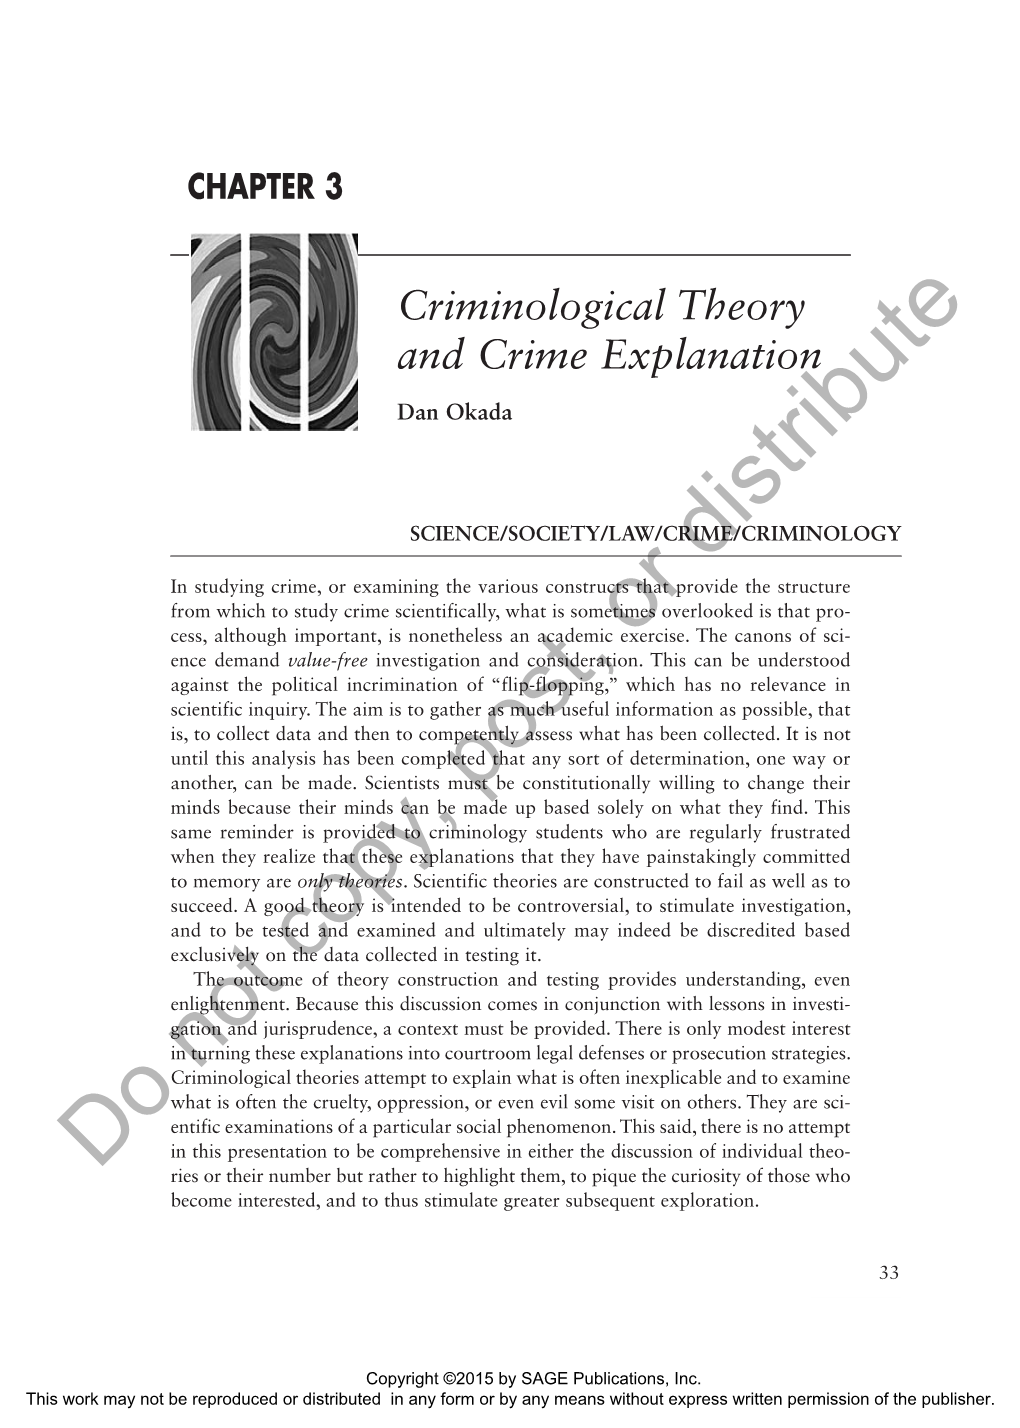 Criminological Theory and Crime Explanation